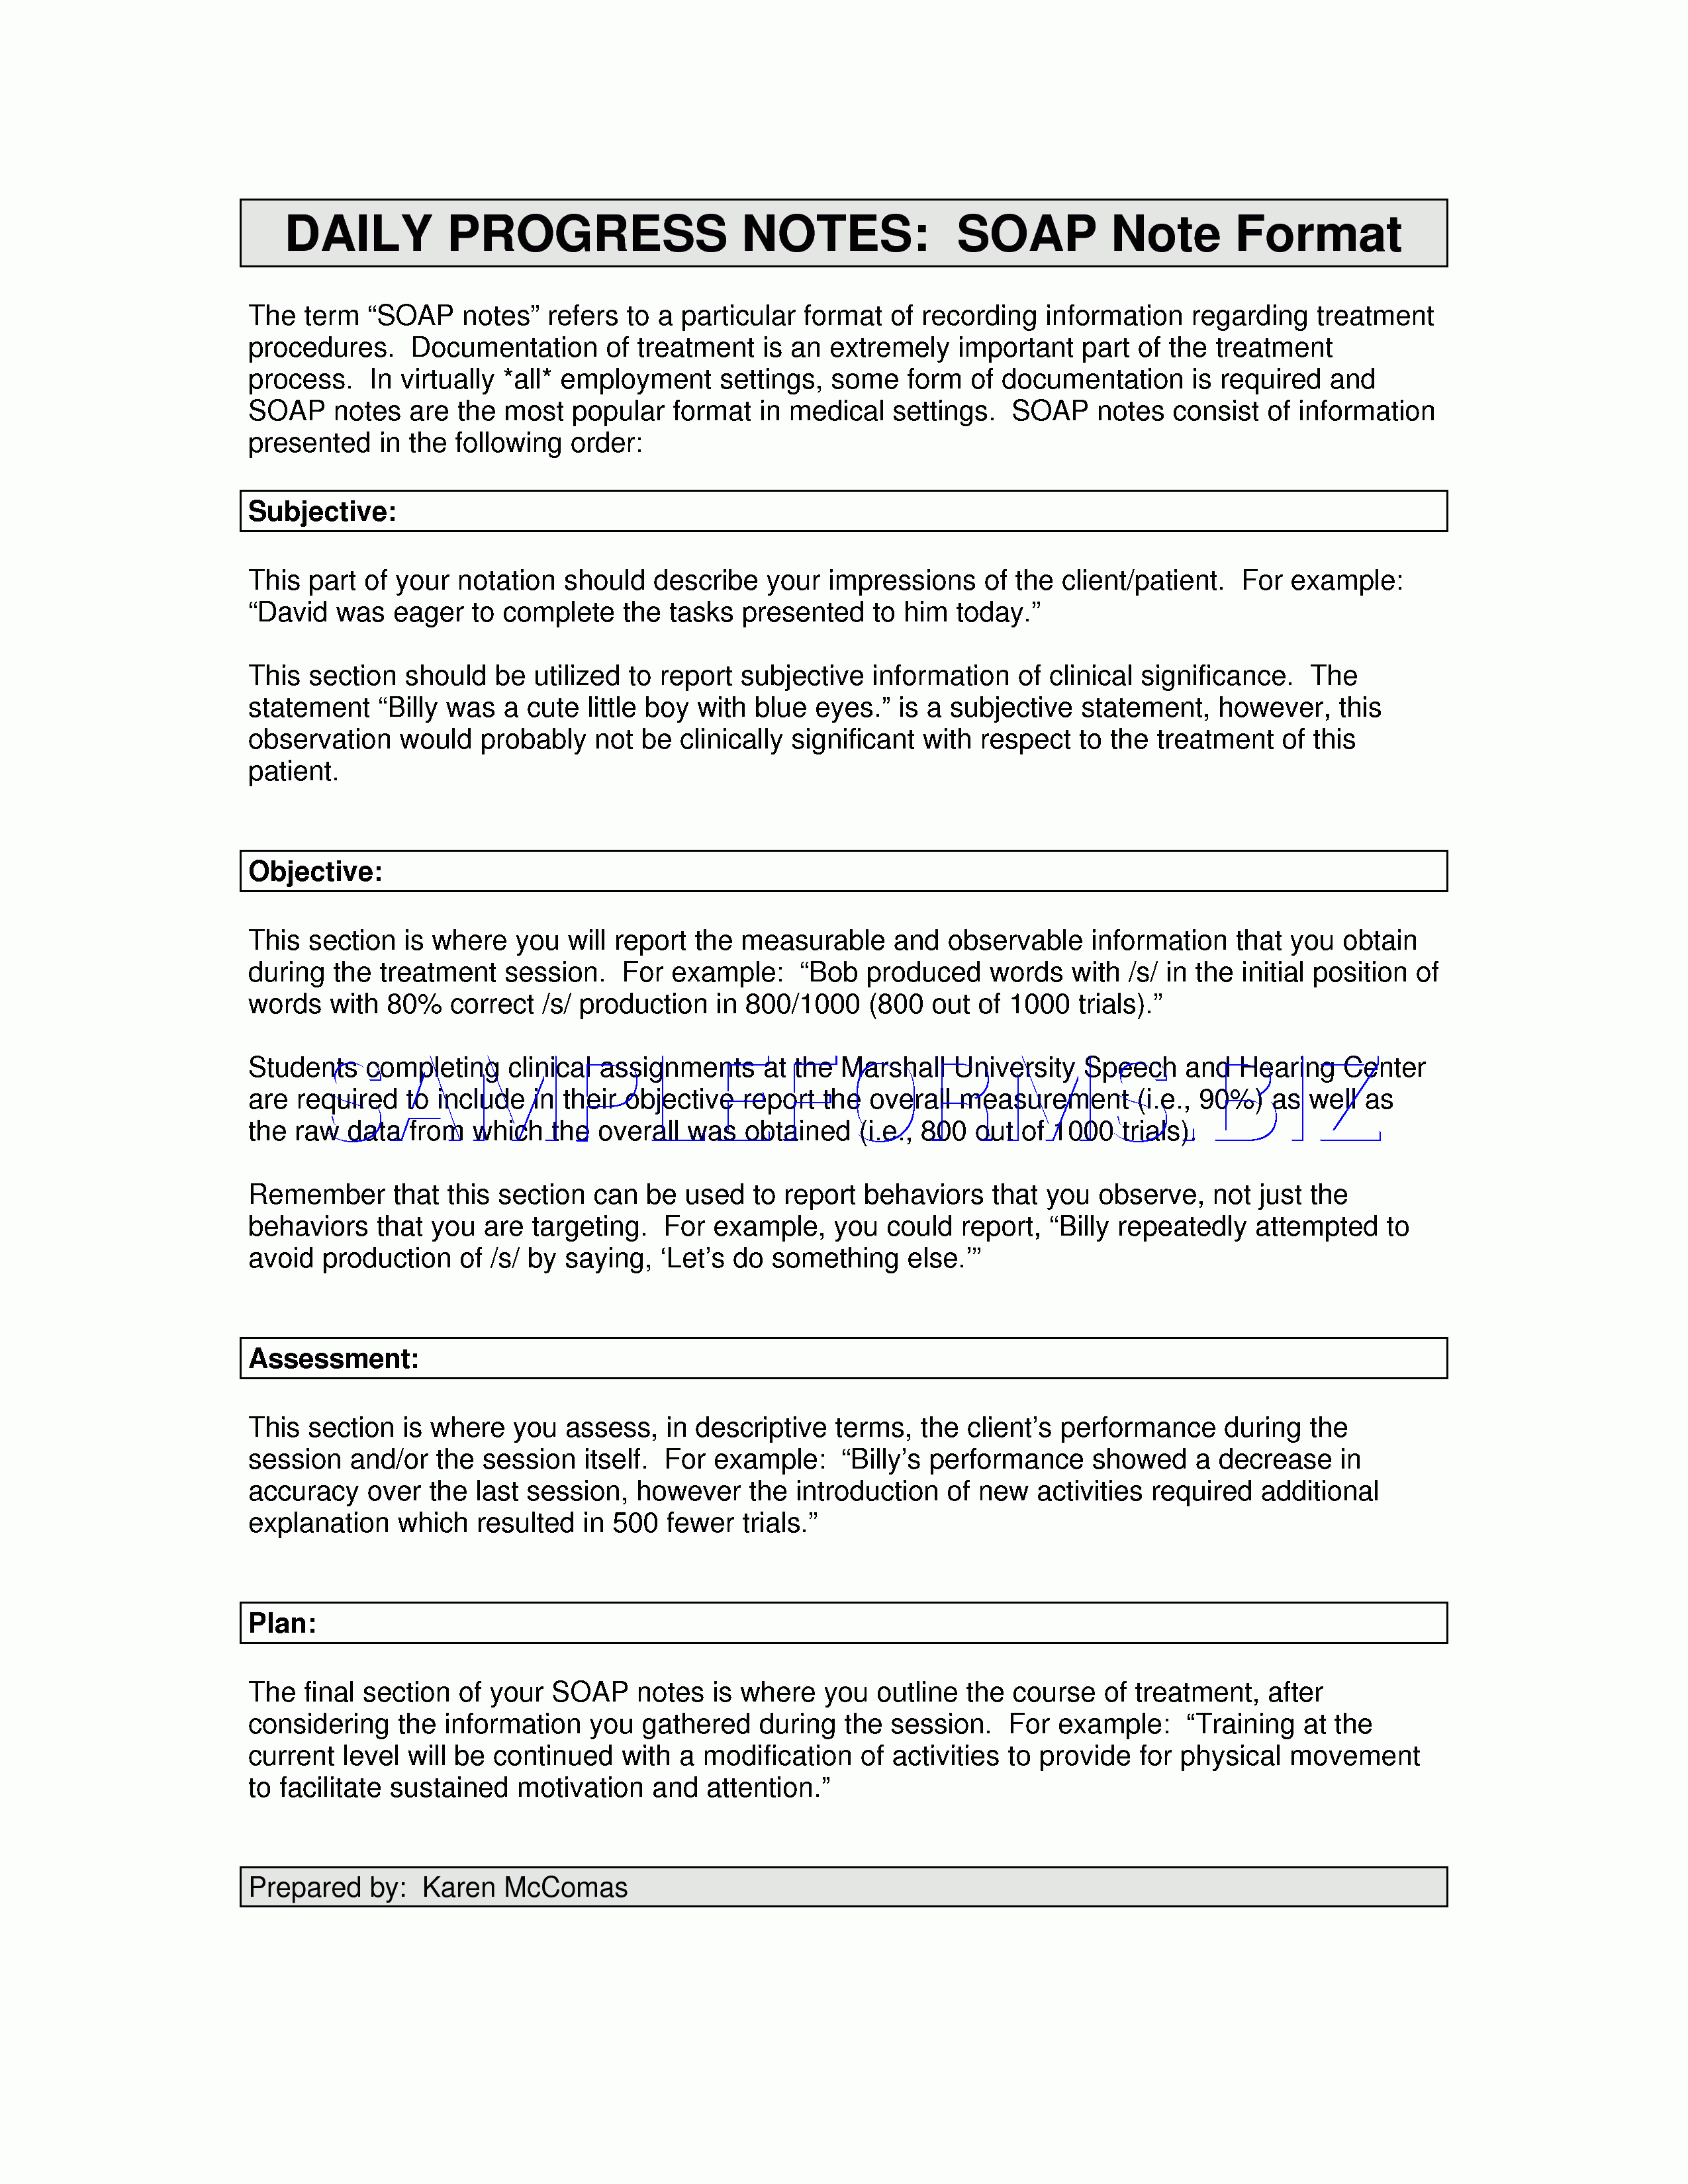 Preview Pdf Soap Note Format Template, 2 For Soap Report Template